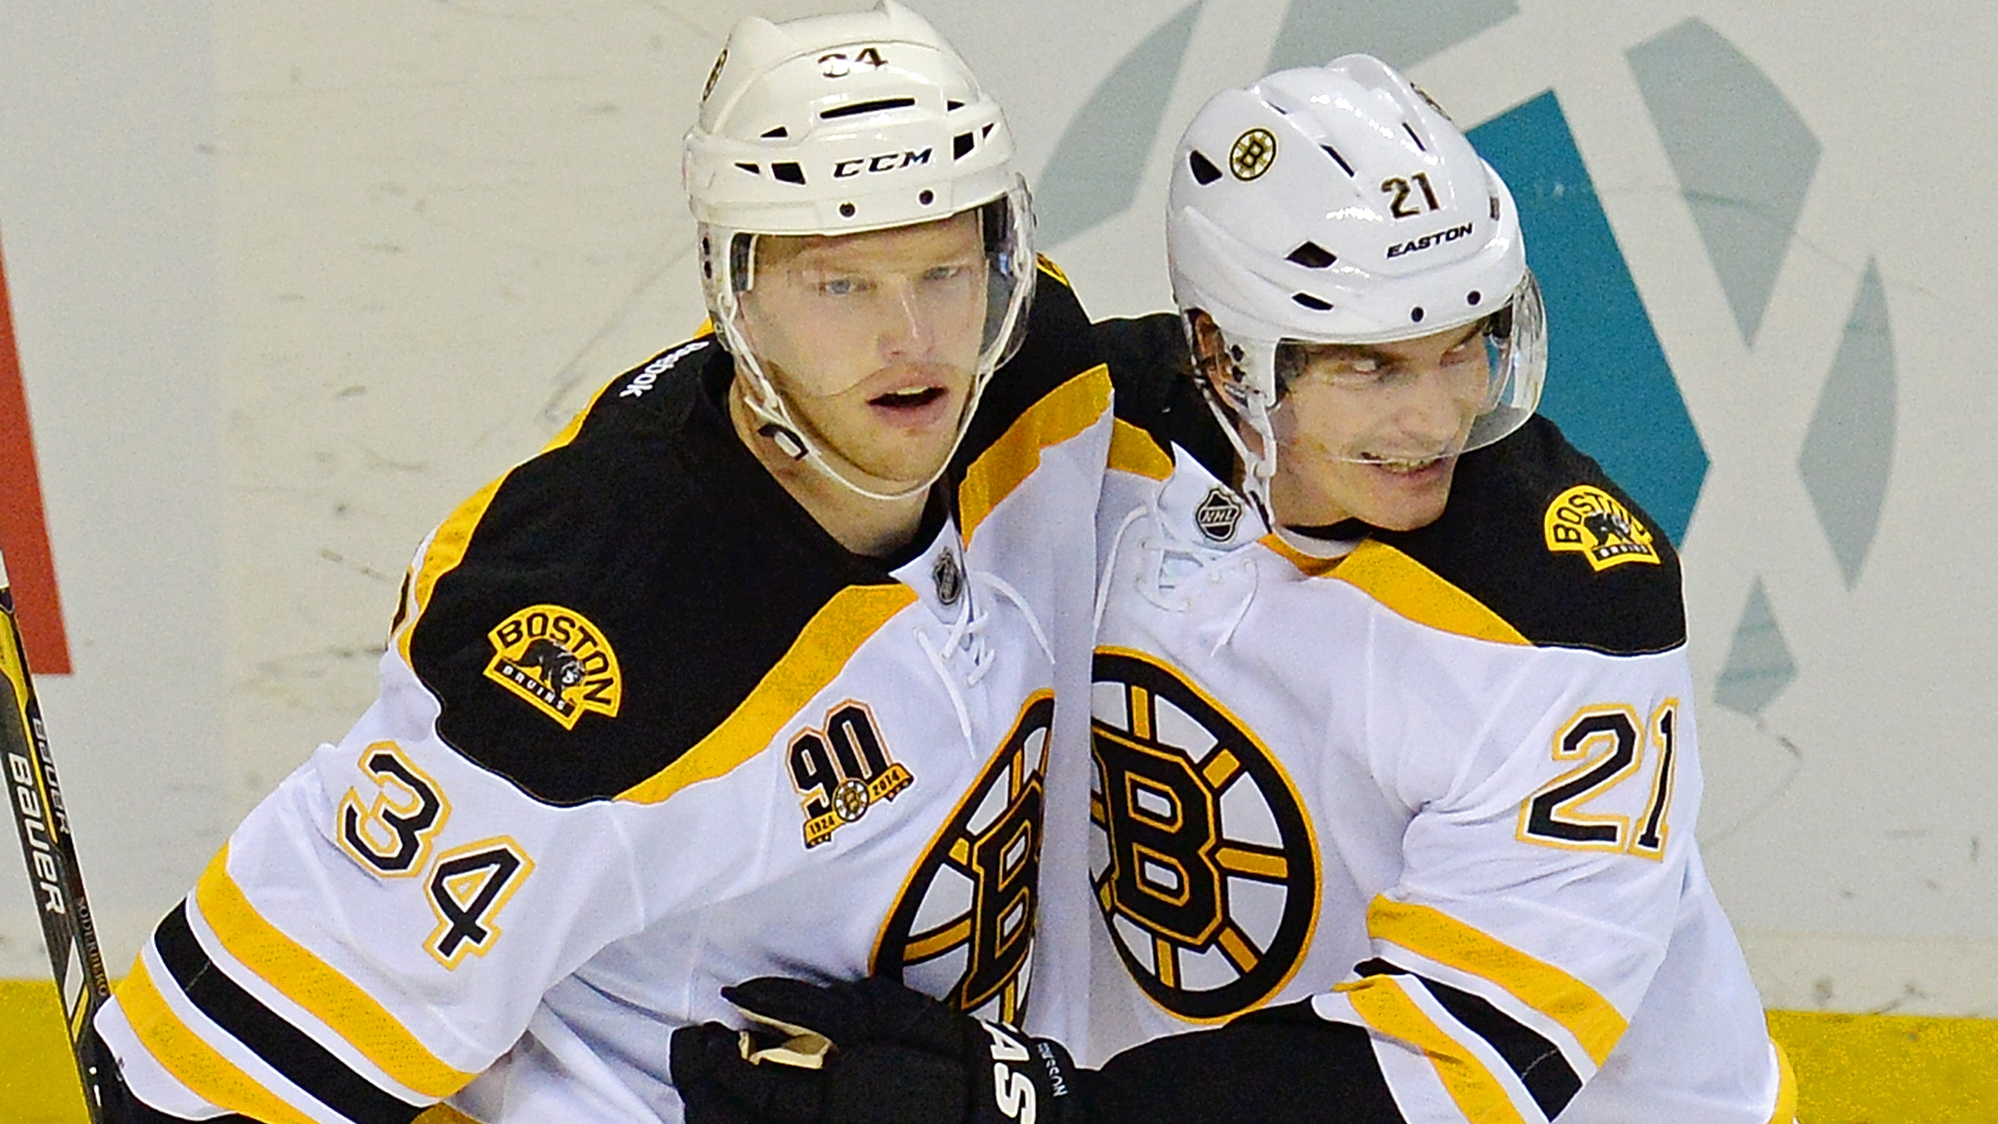 Carl Soderberg and Loui Eriksson celebrate the lone goal from the Bruins' 1-0 victory over San Jose. (Photo by Thearon W. Henderson/Getty Images)